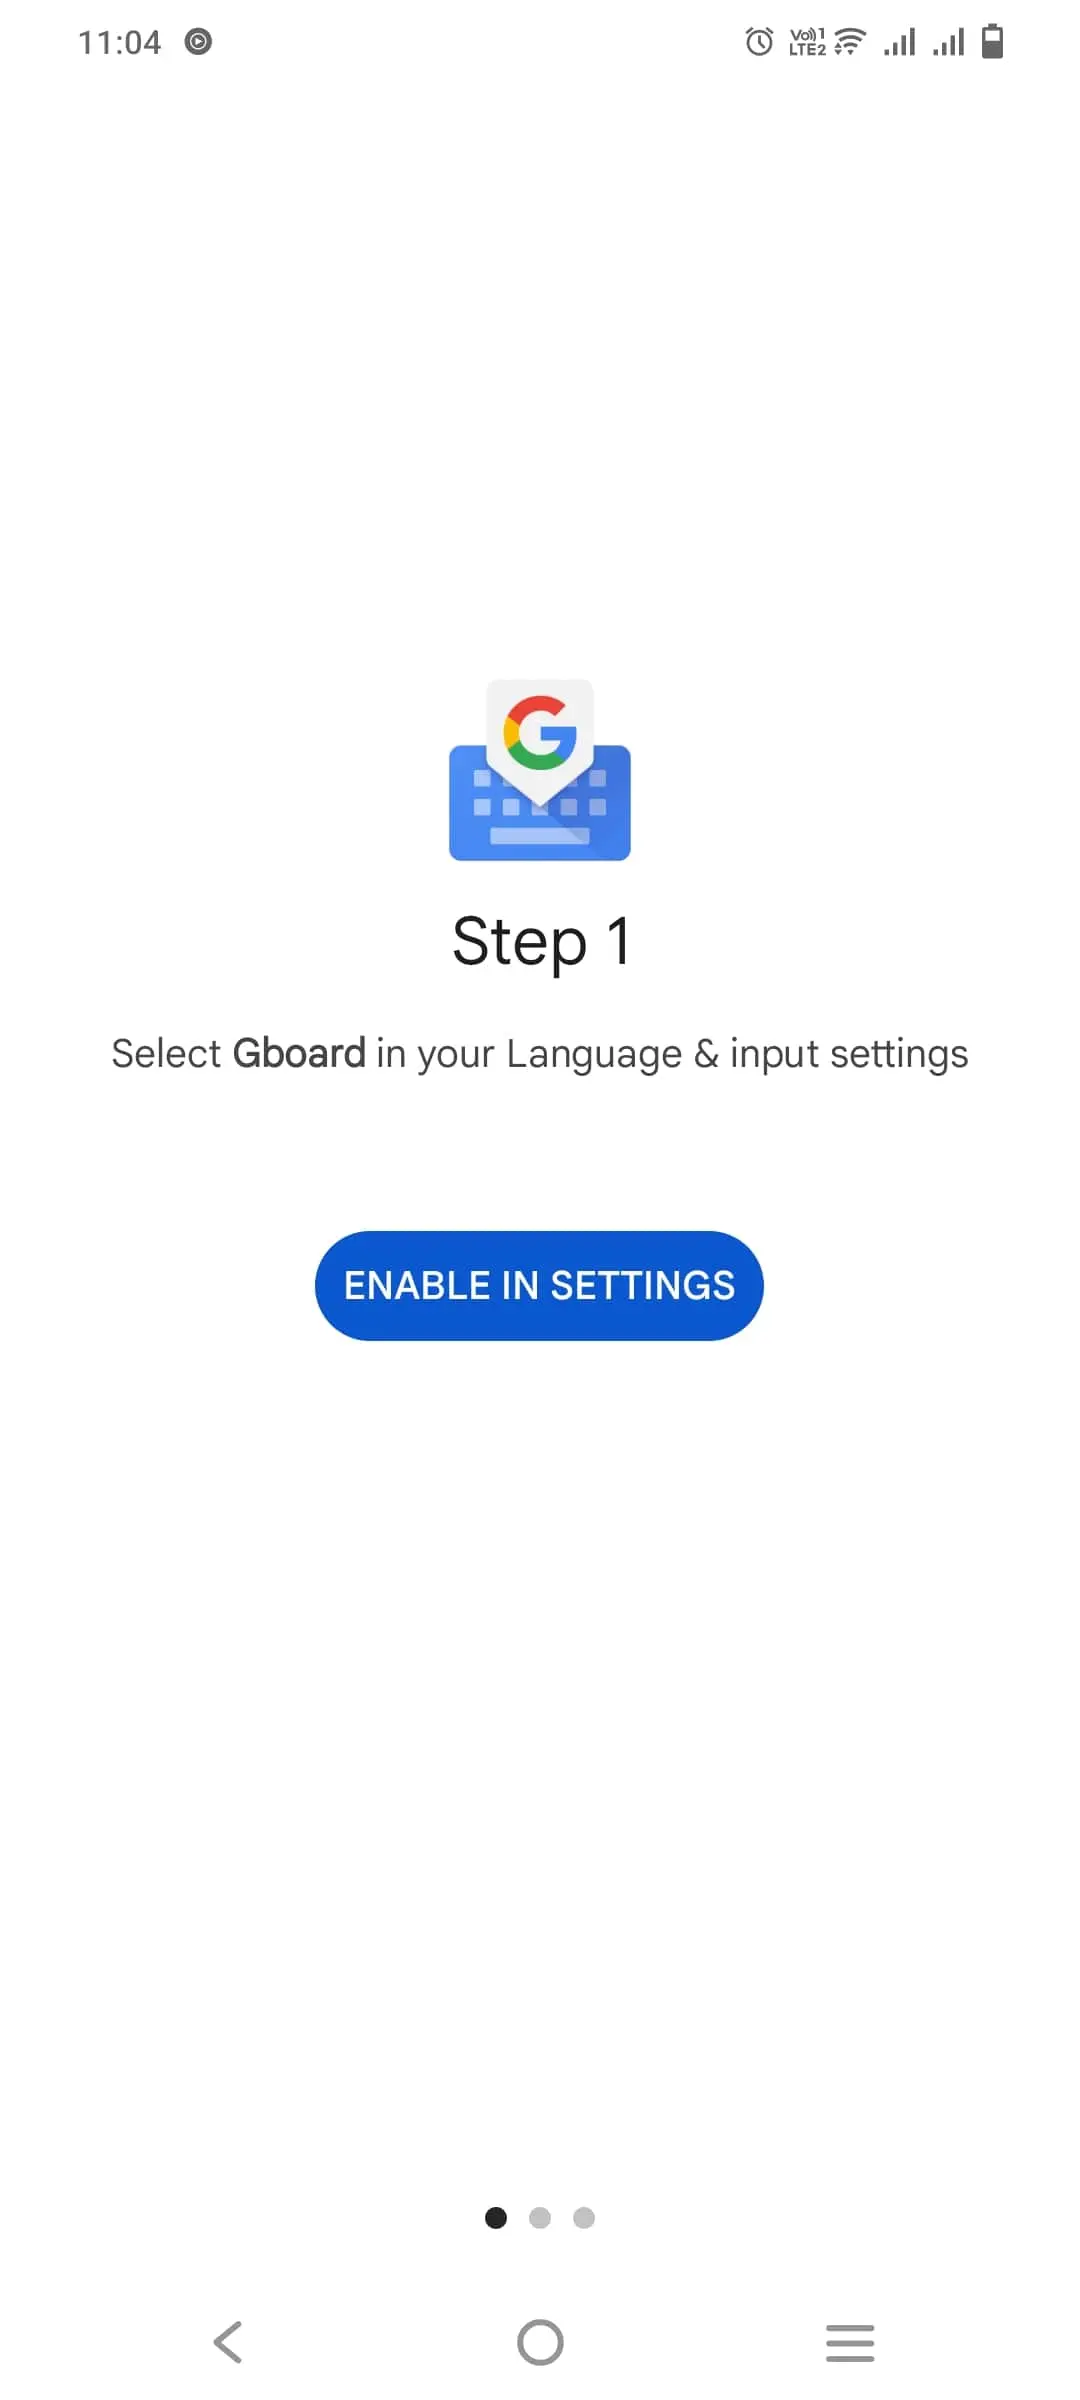 Enable Hindi typing in mobile